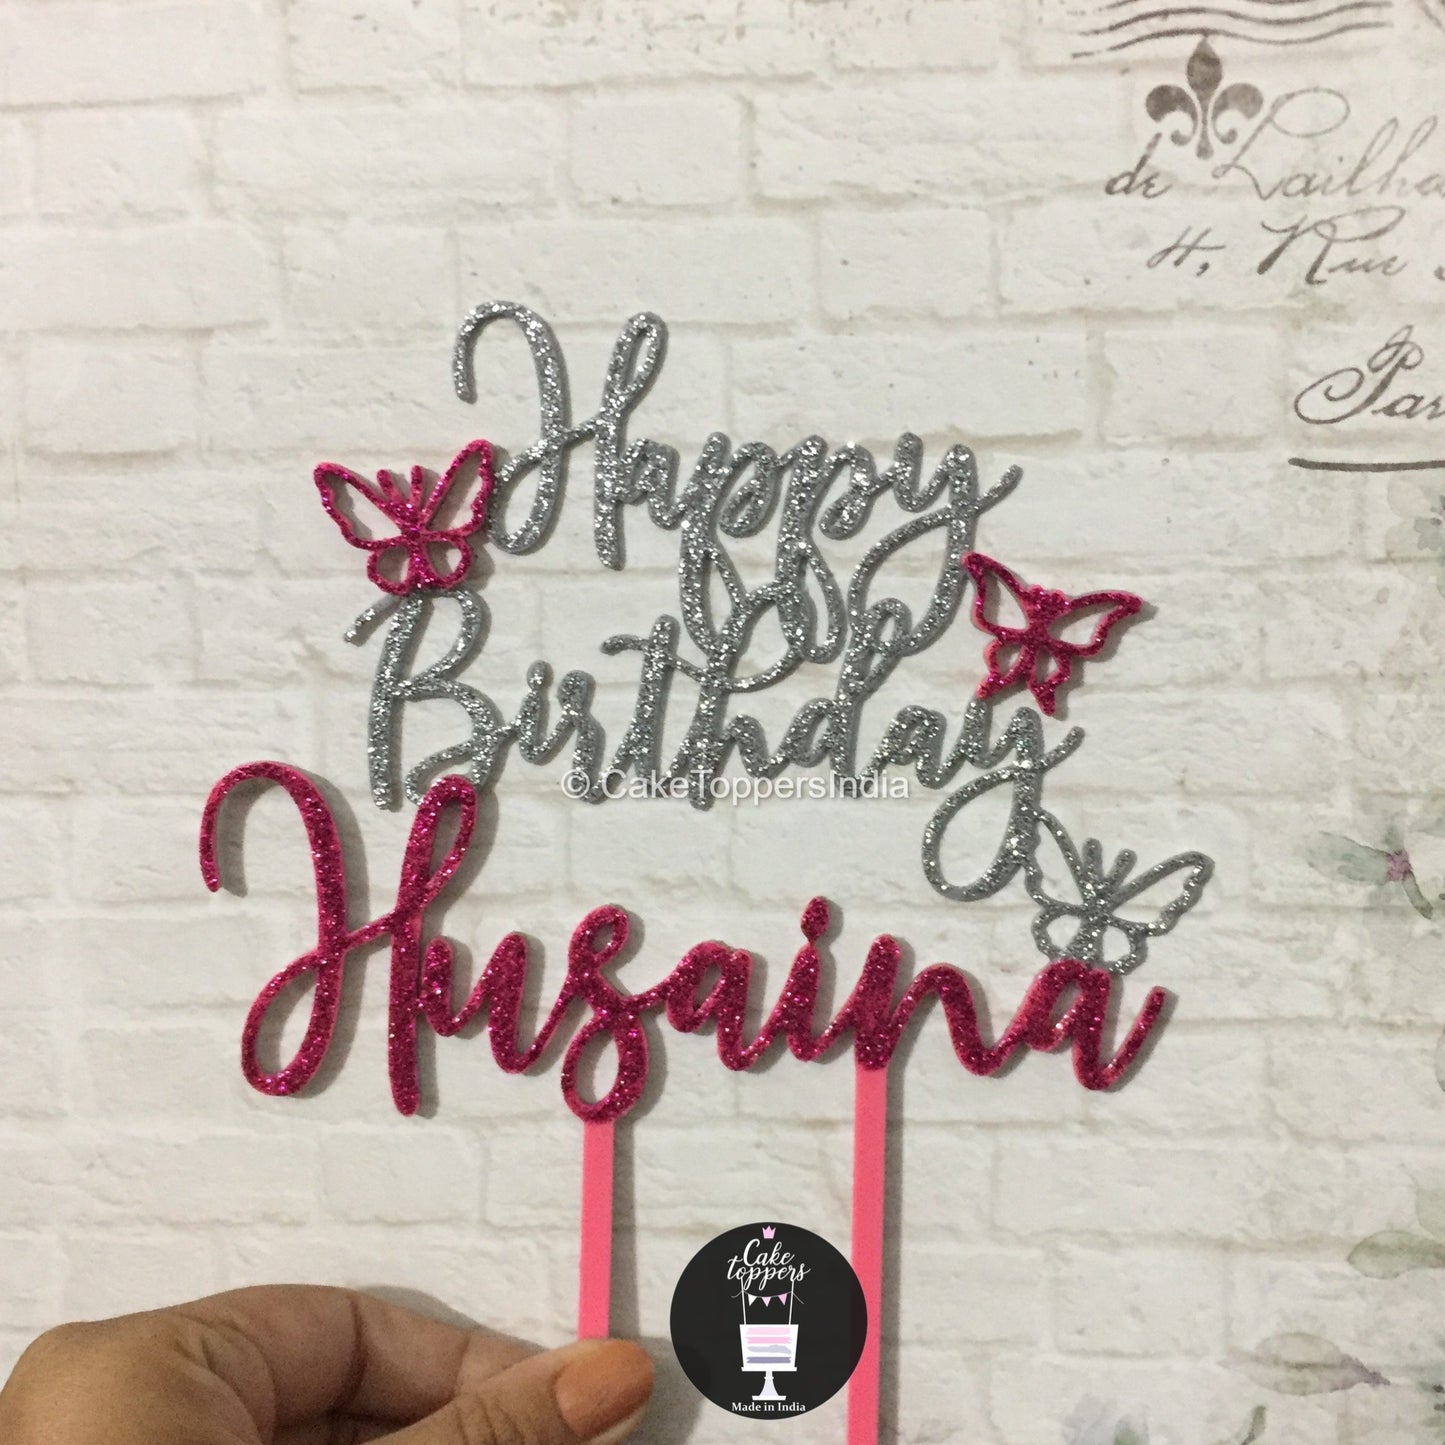 Personalized / Customized Happy Birthday Cake Topper with Name and Age PHBDCT014